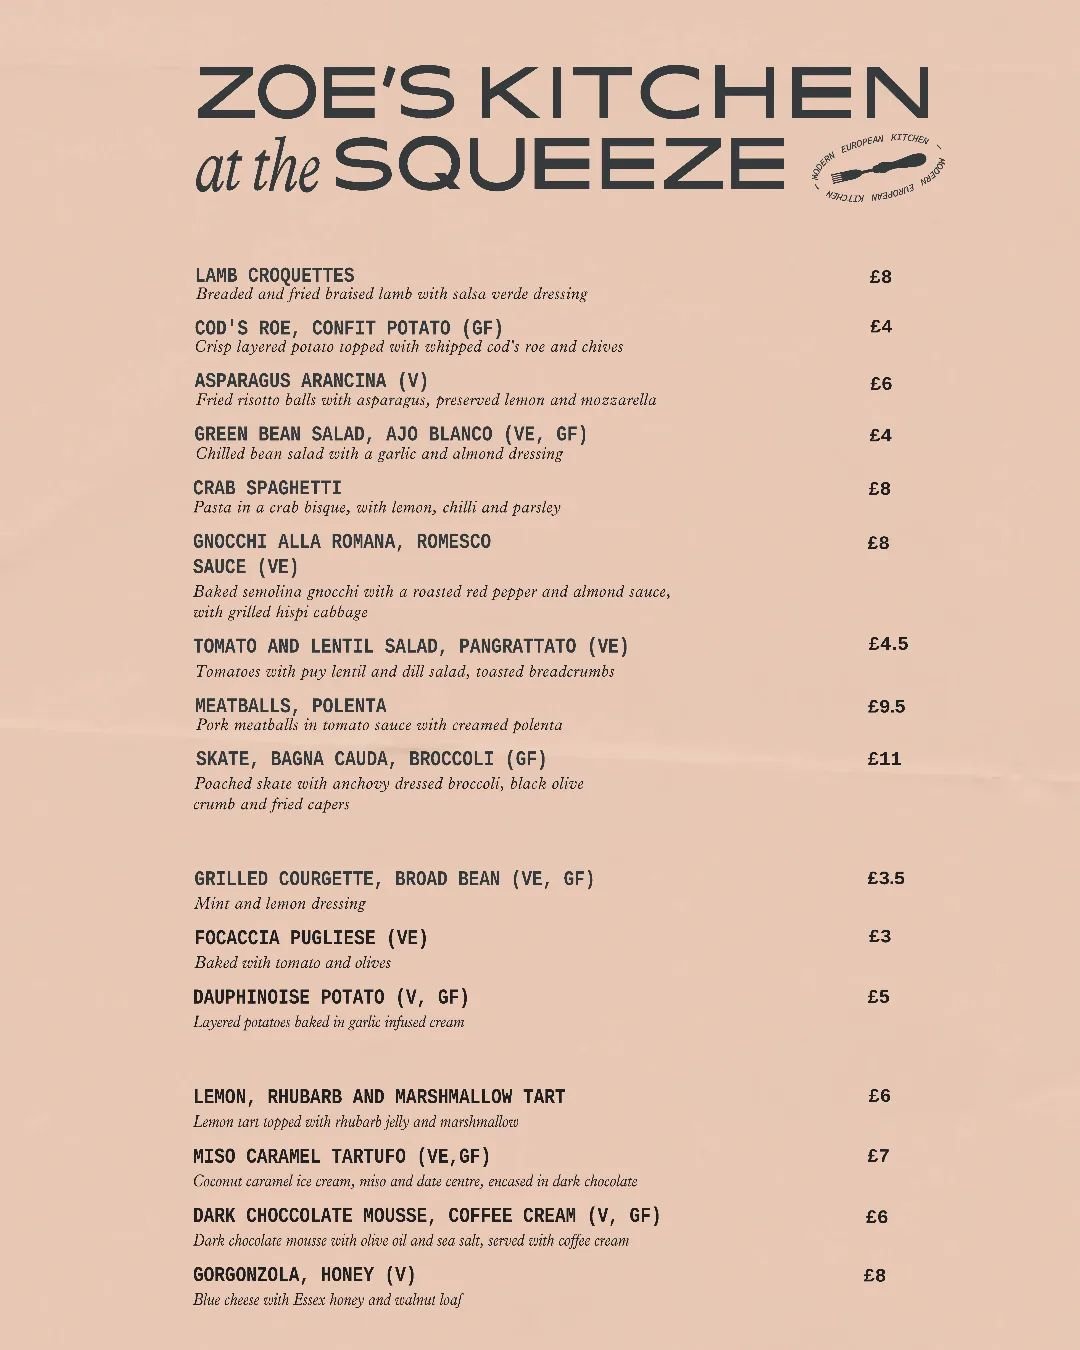 💥 UPDATED MENU💥 we've been recipe testing all week (very exciting!) and so have made a few tweaks and added pricing to the menu for our pop-up at @thesqueezecafe, kicking off in just 3 weeks! 🙌 head to the link in bio to book your table 🧡